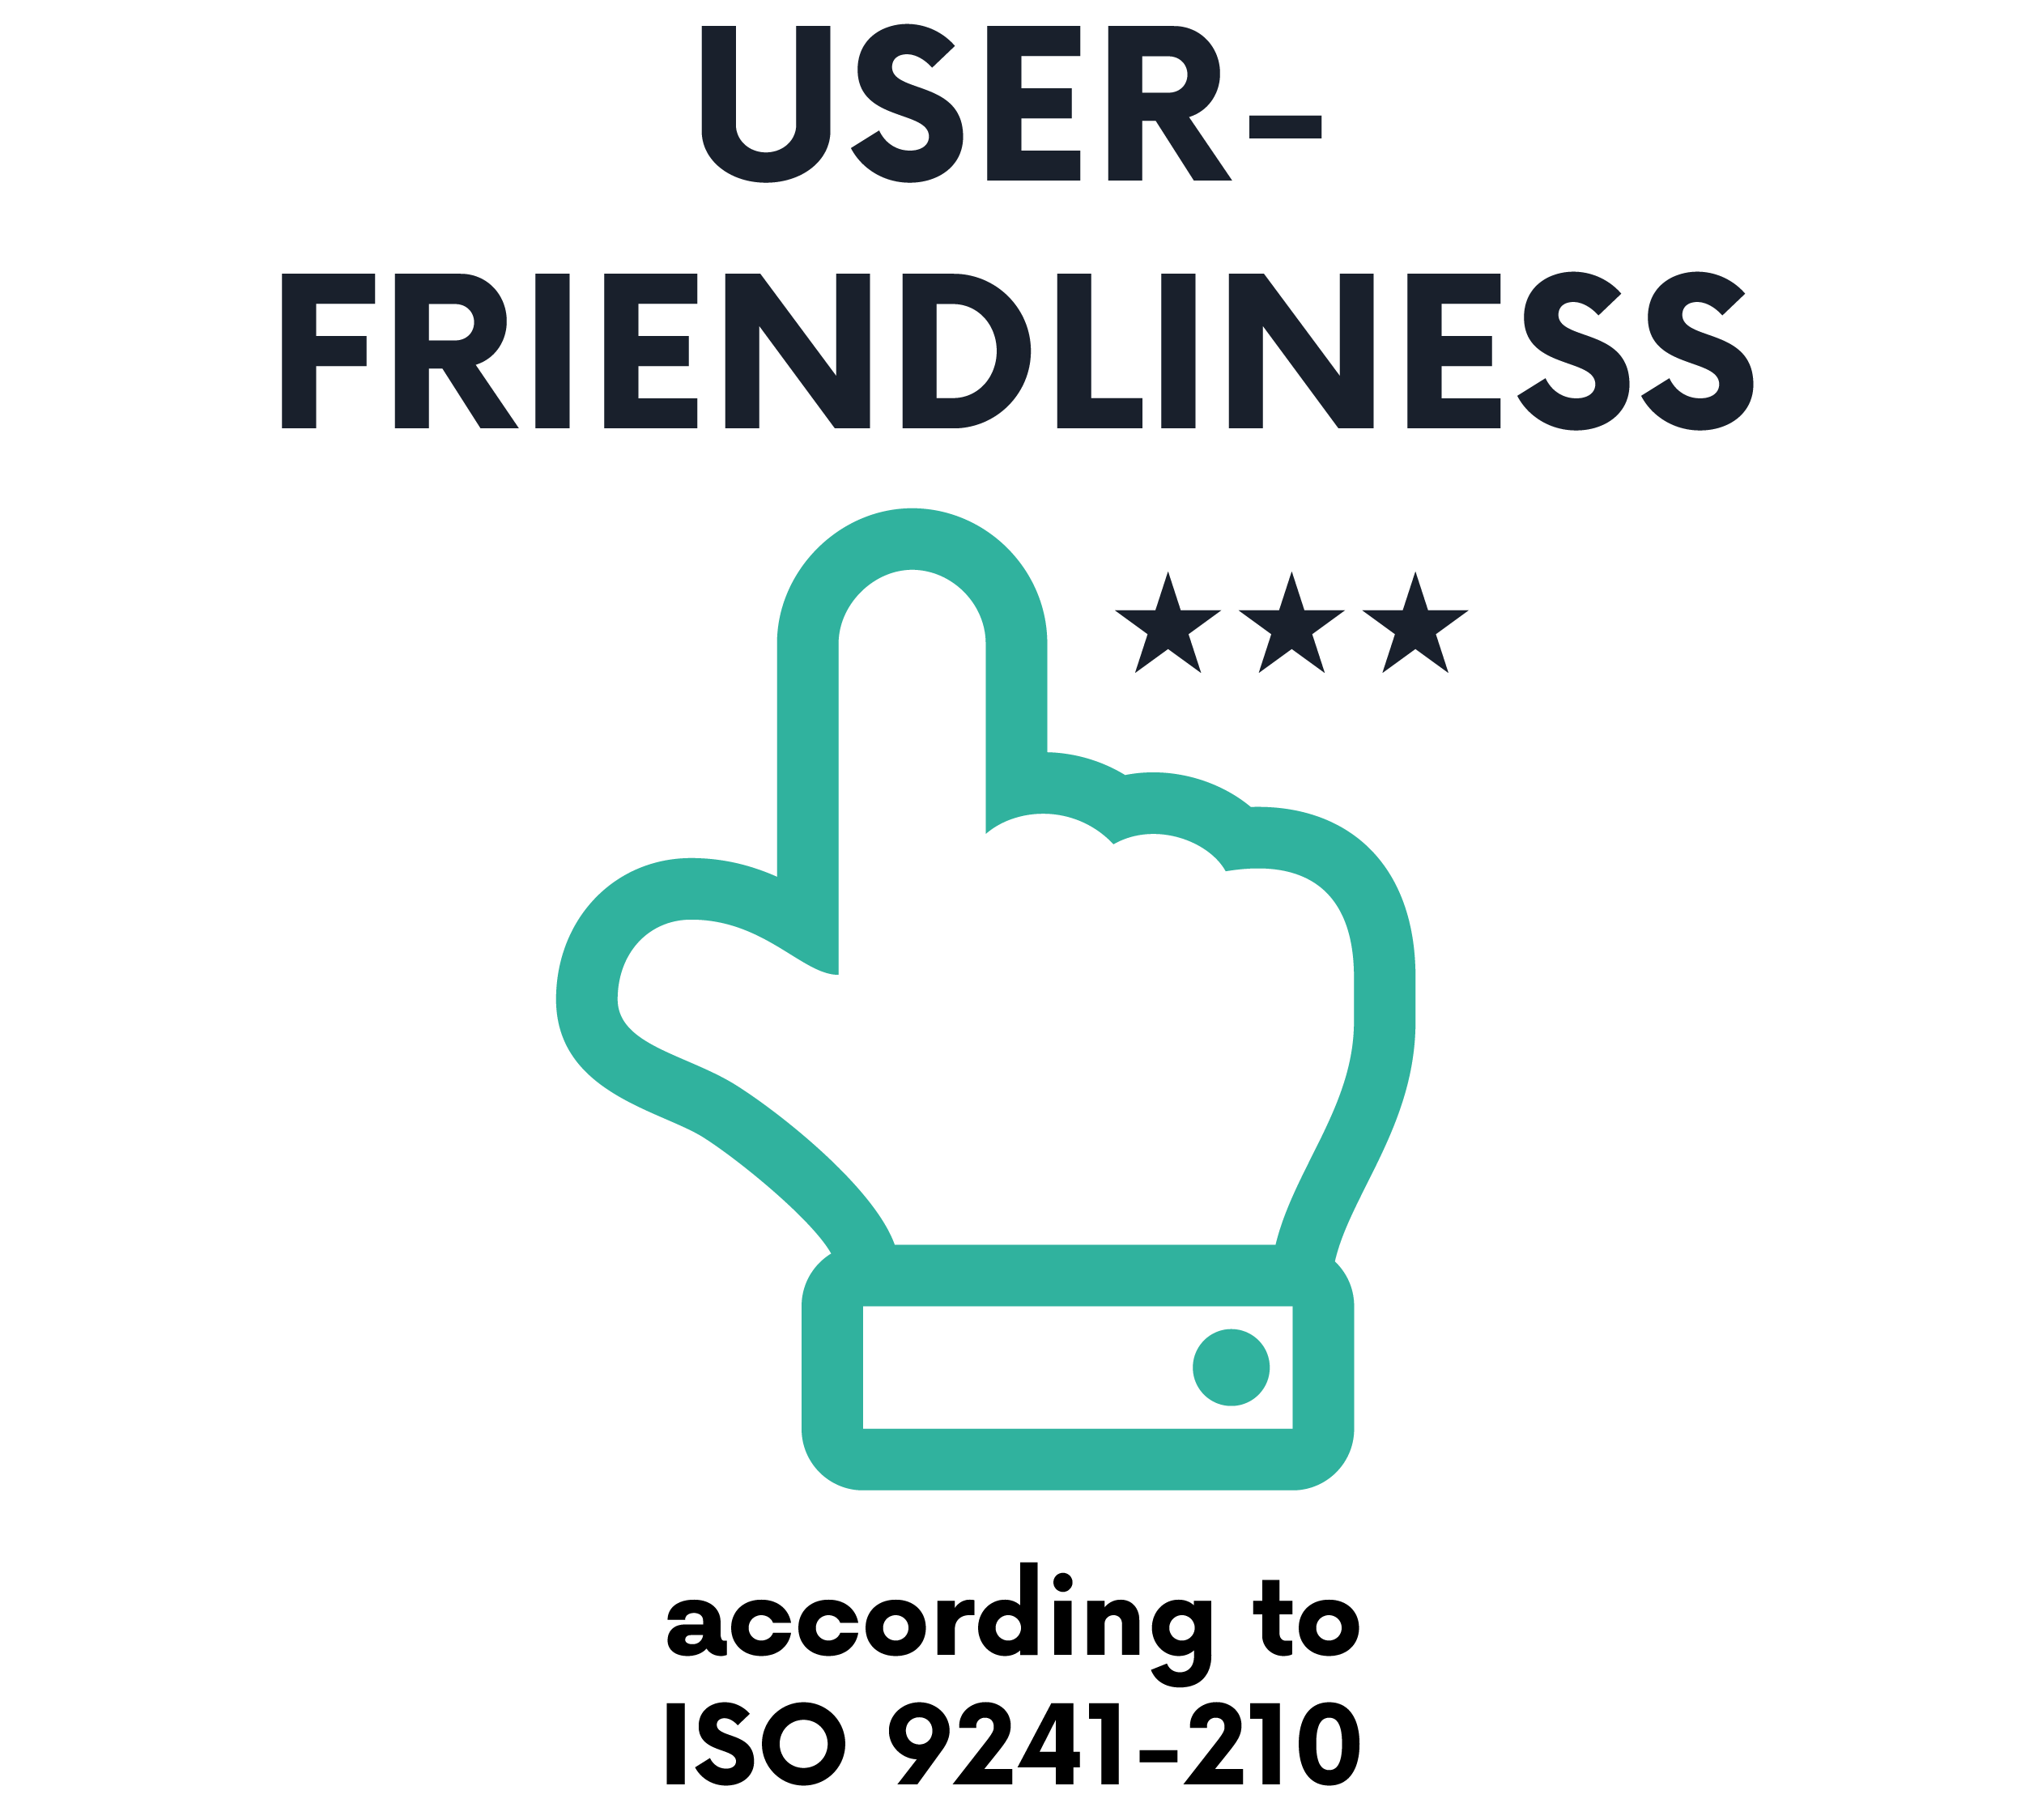 user experience and sser friendliness by Scable